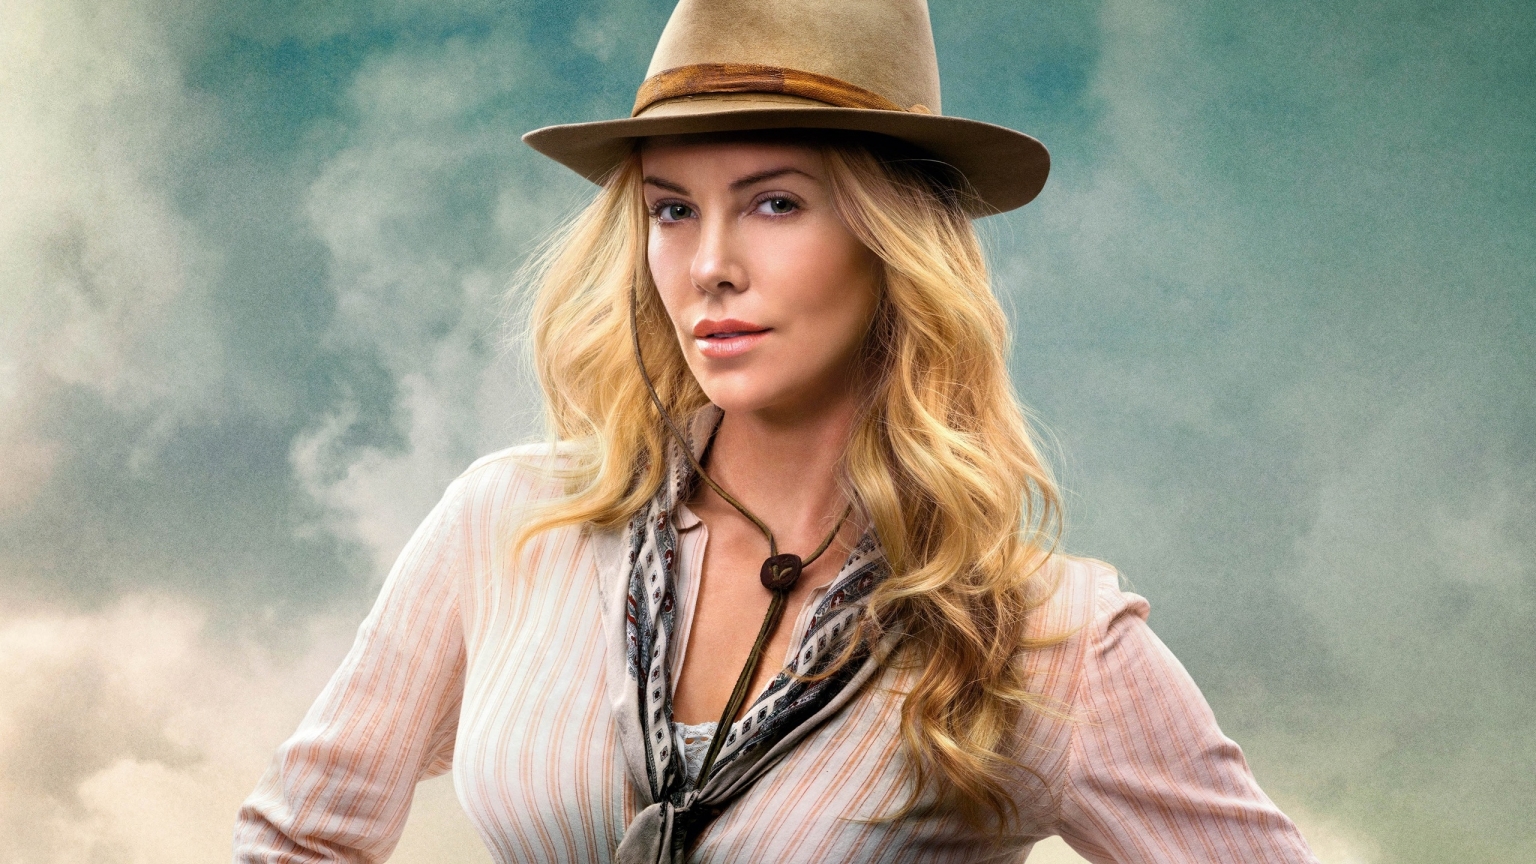 Charlize Theron in A Million Ways to Die in the West for 1536 x 864 HDTV resolution